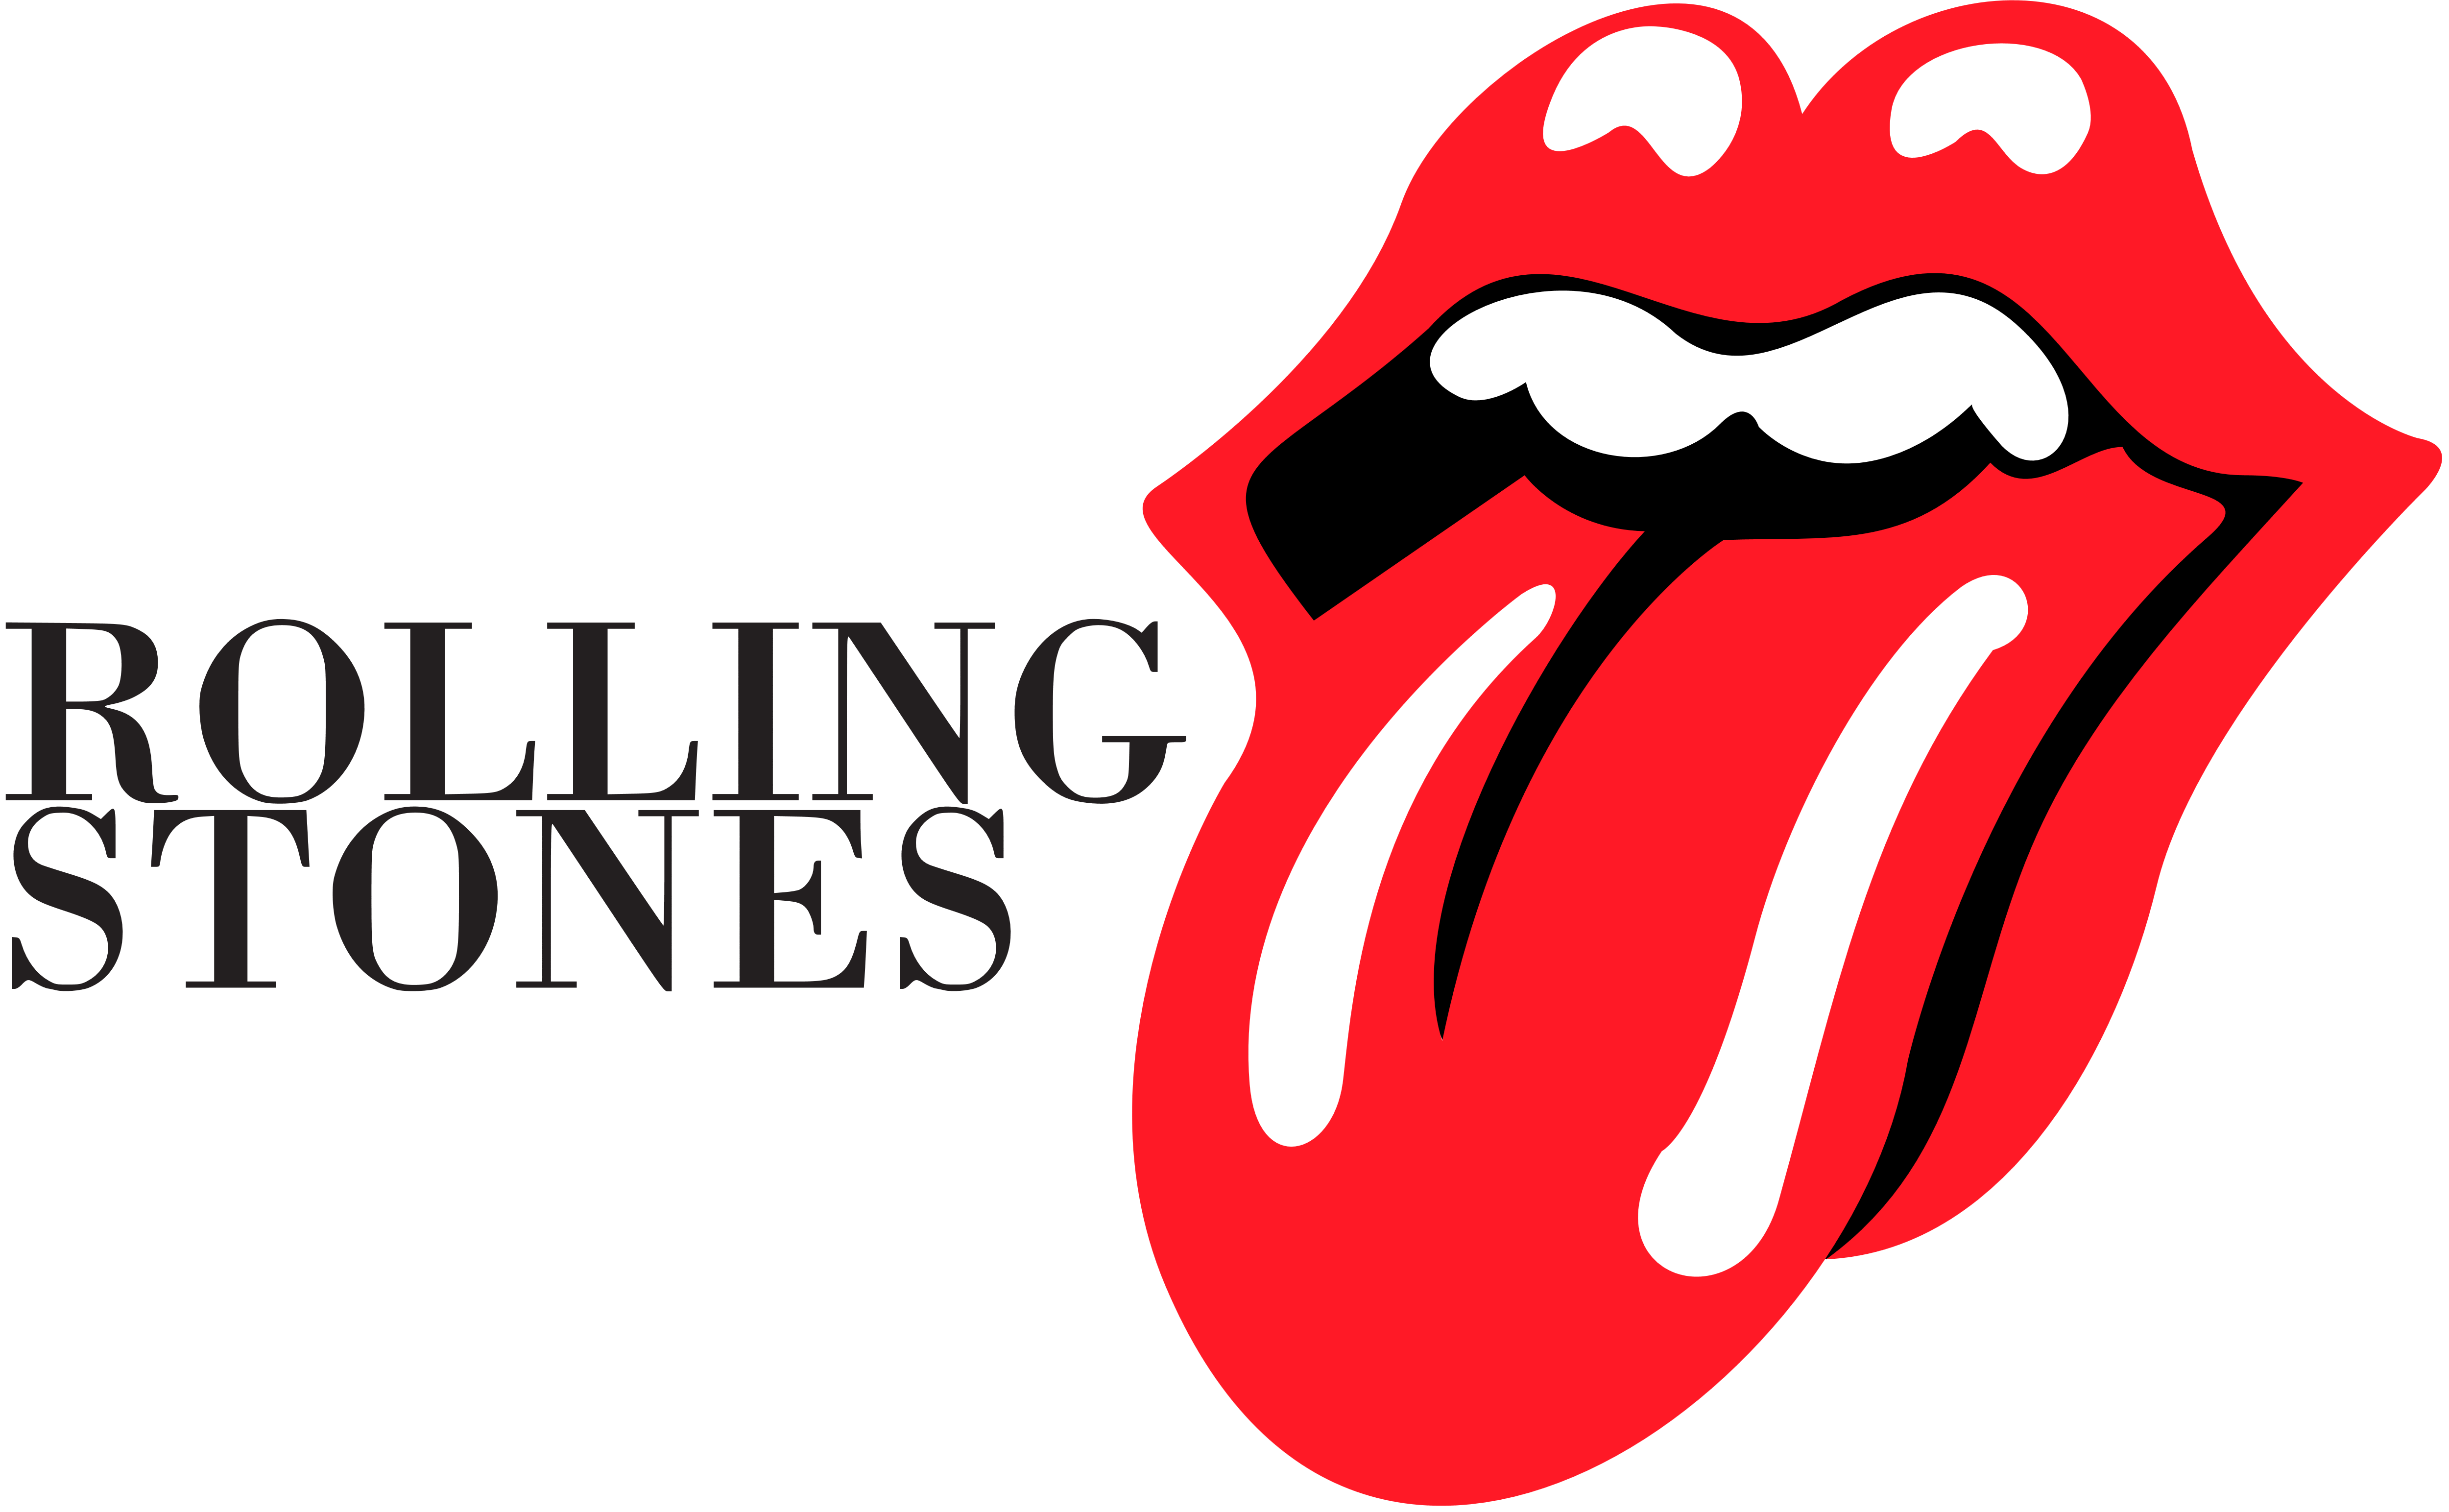 The Rolling Stones – Logos Download